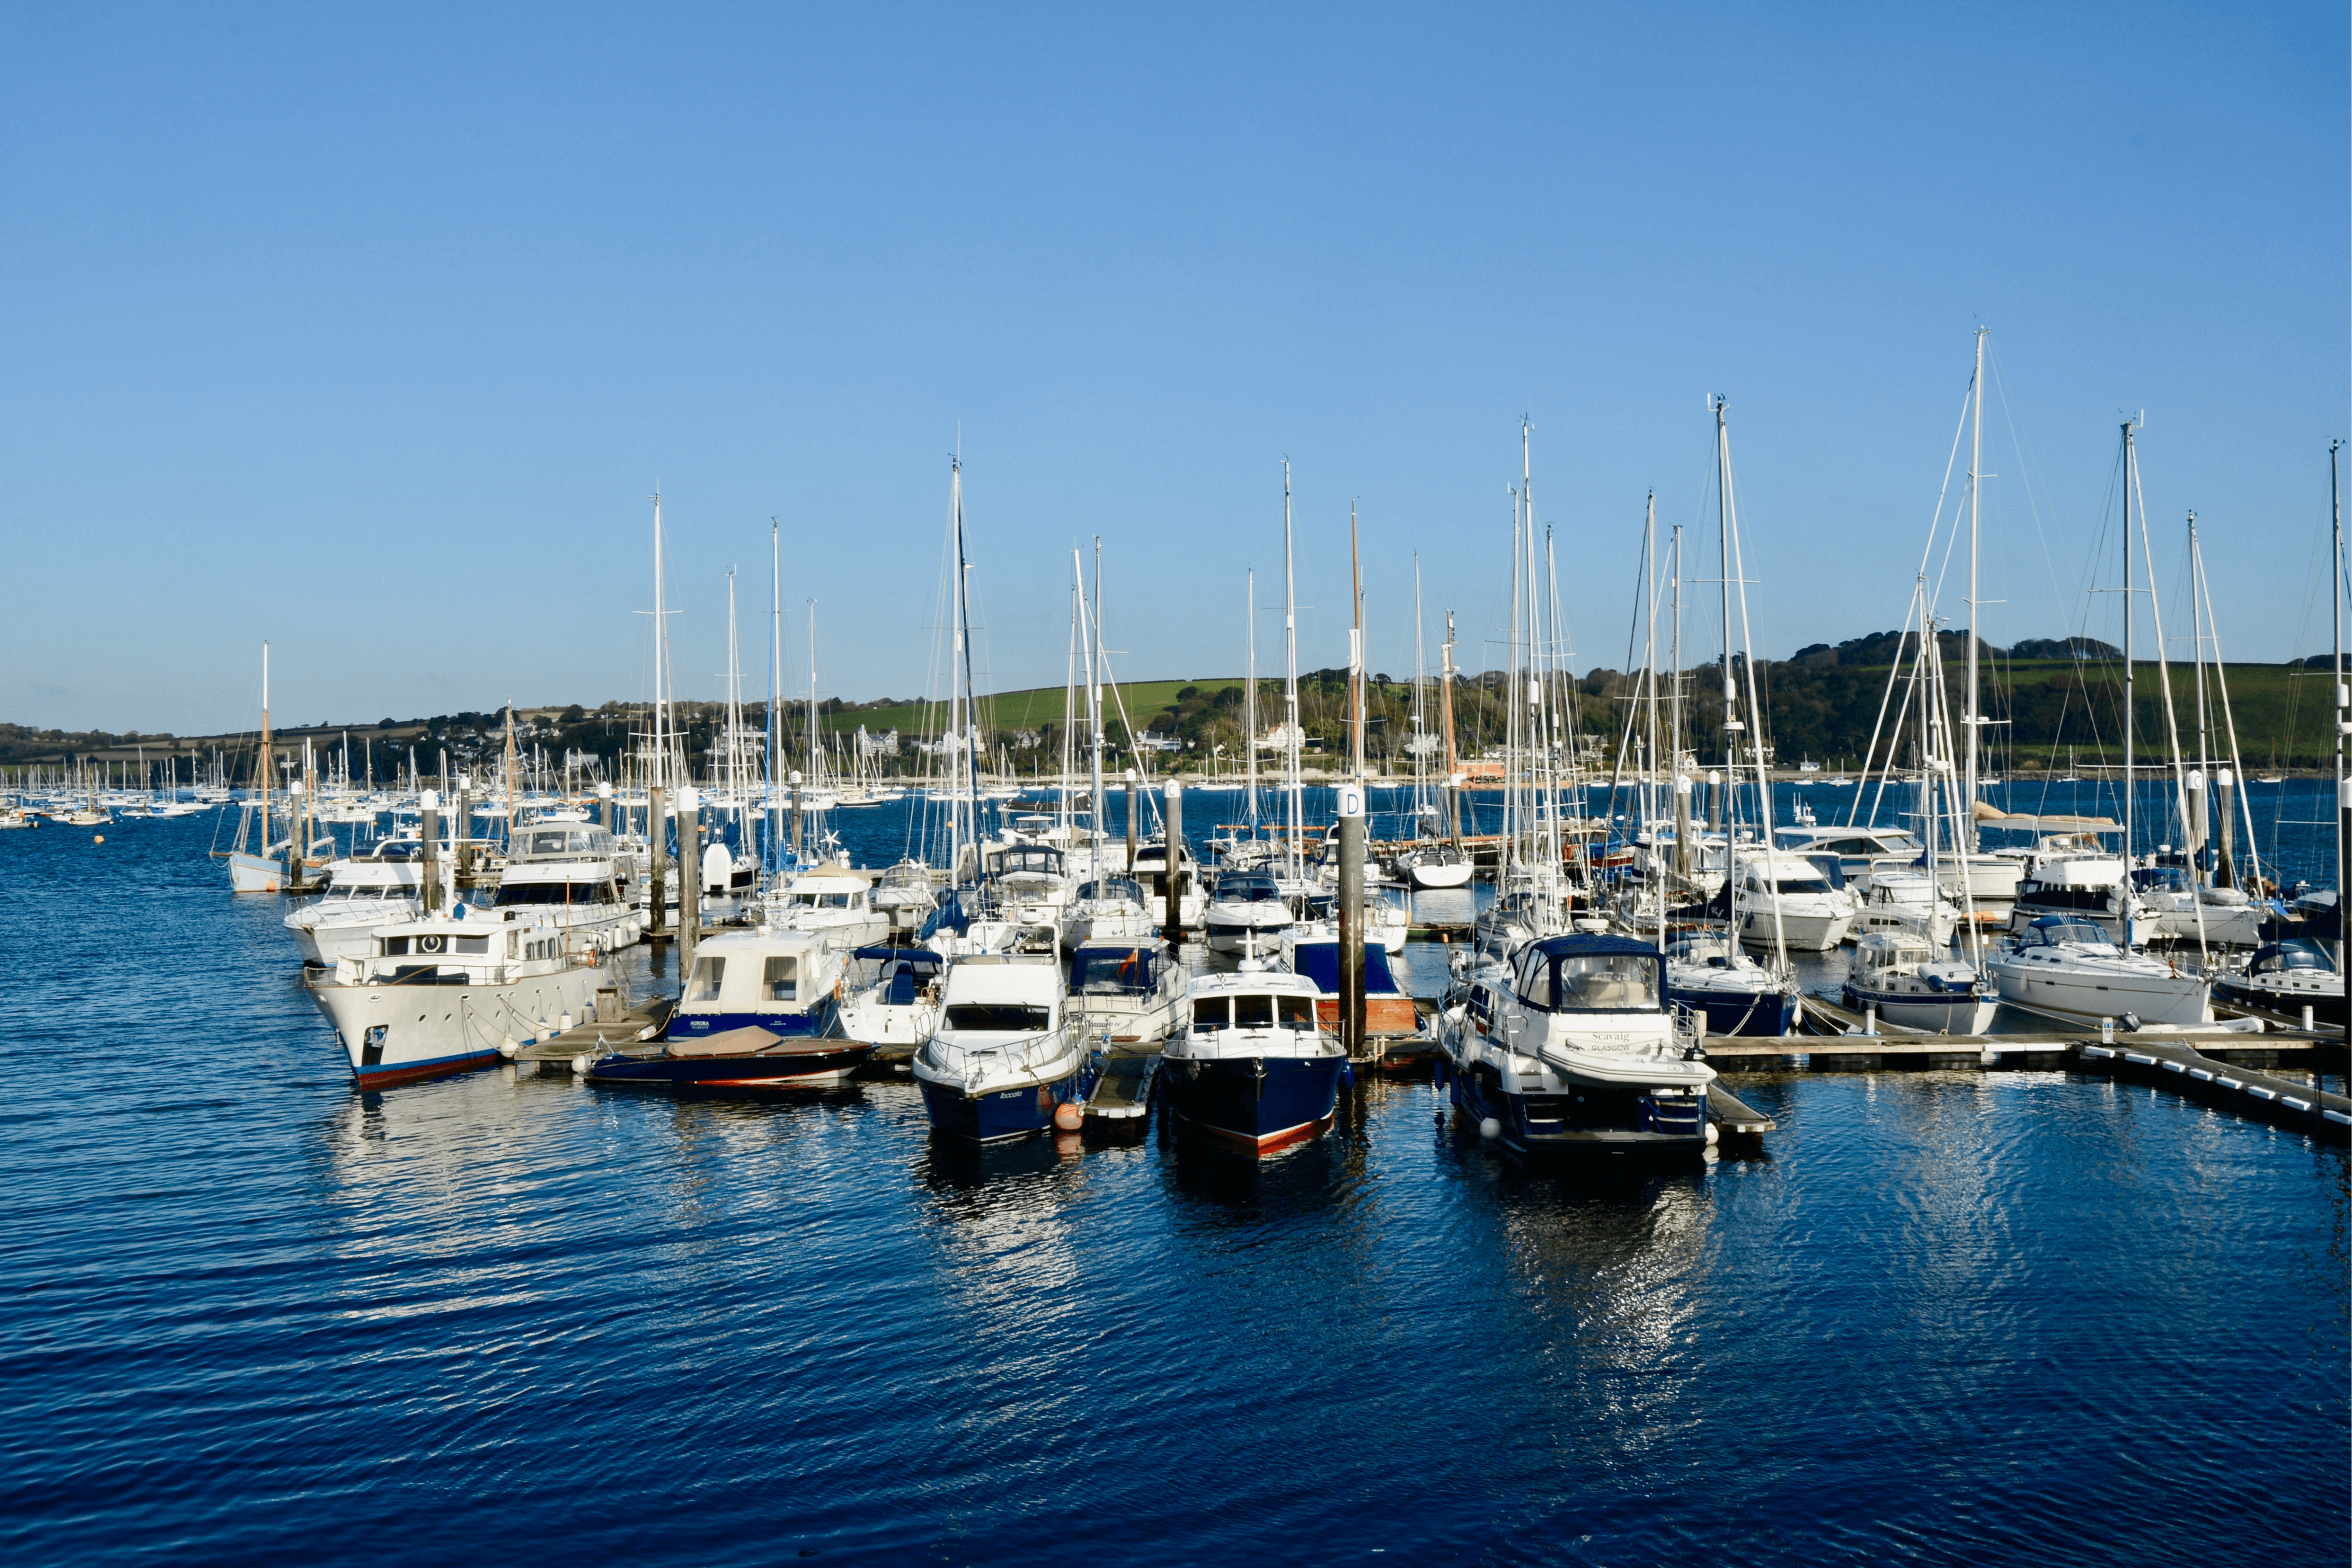 22 Great Things to Do in Falmouth for a Day Out